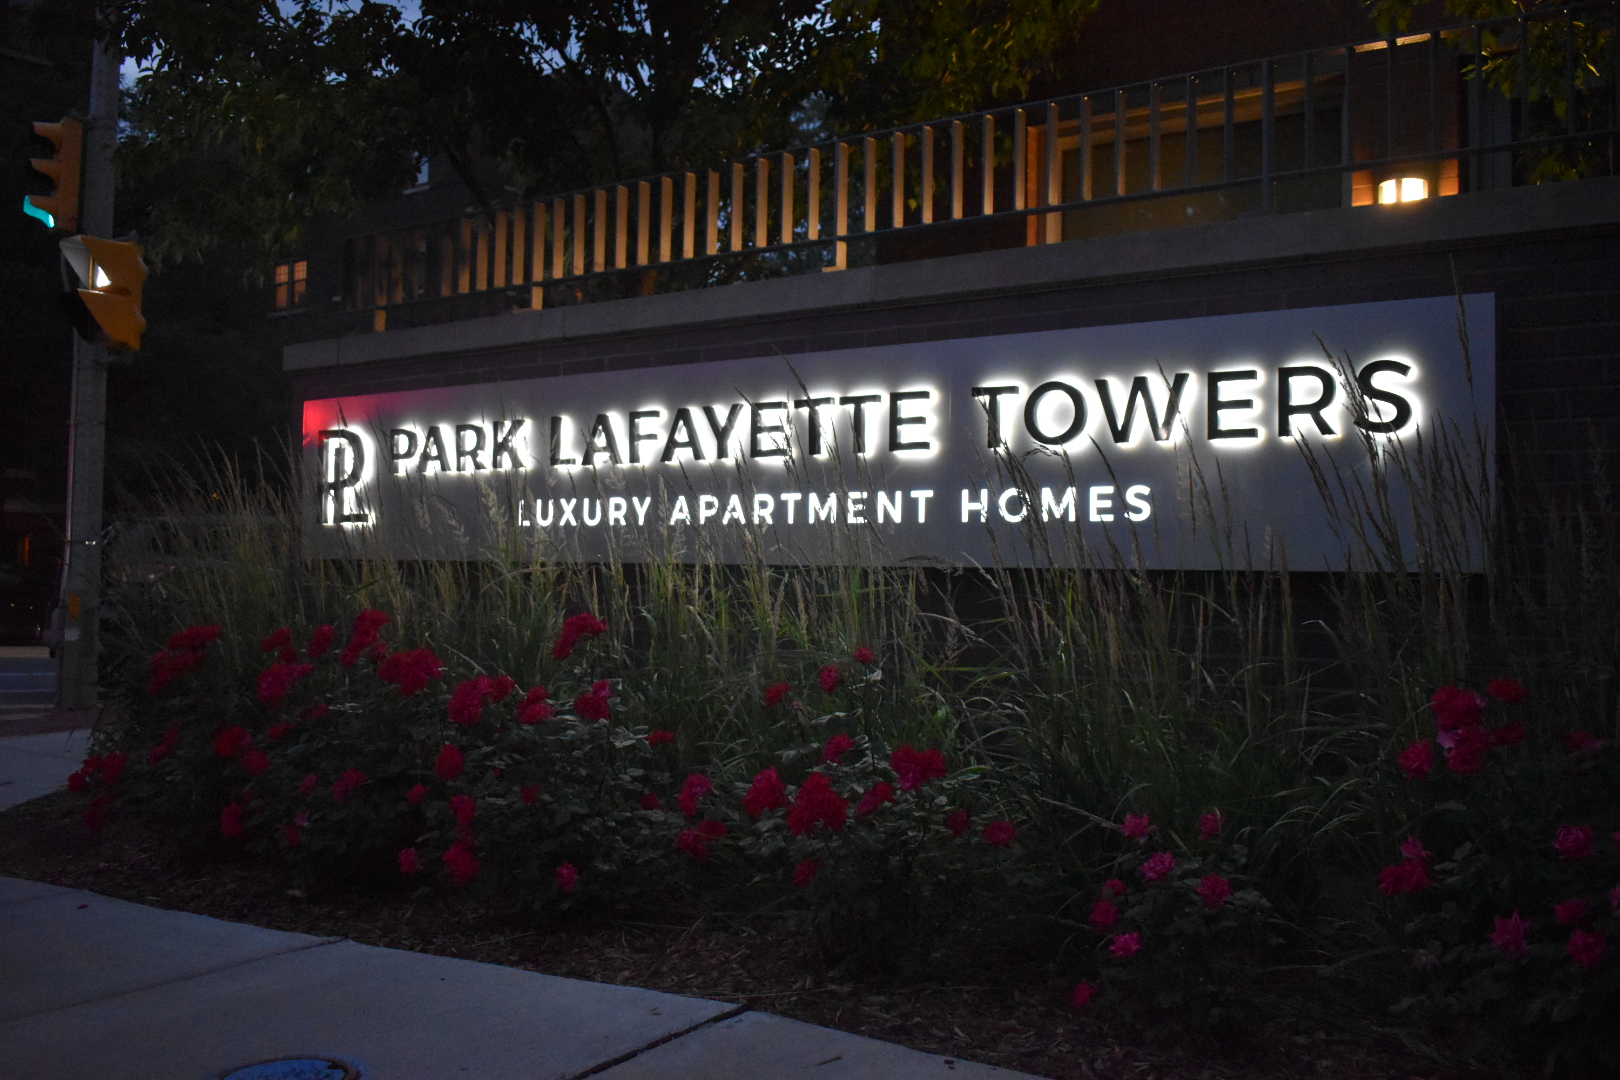 park lafayette towers luxury apartment homes sign